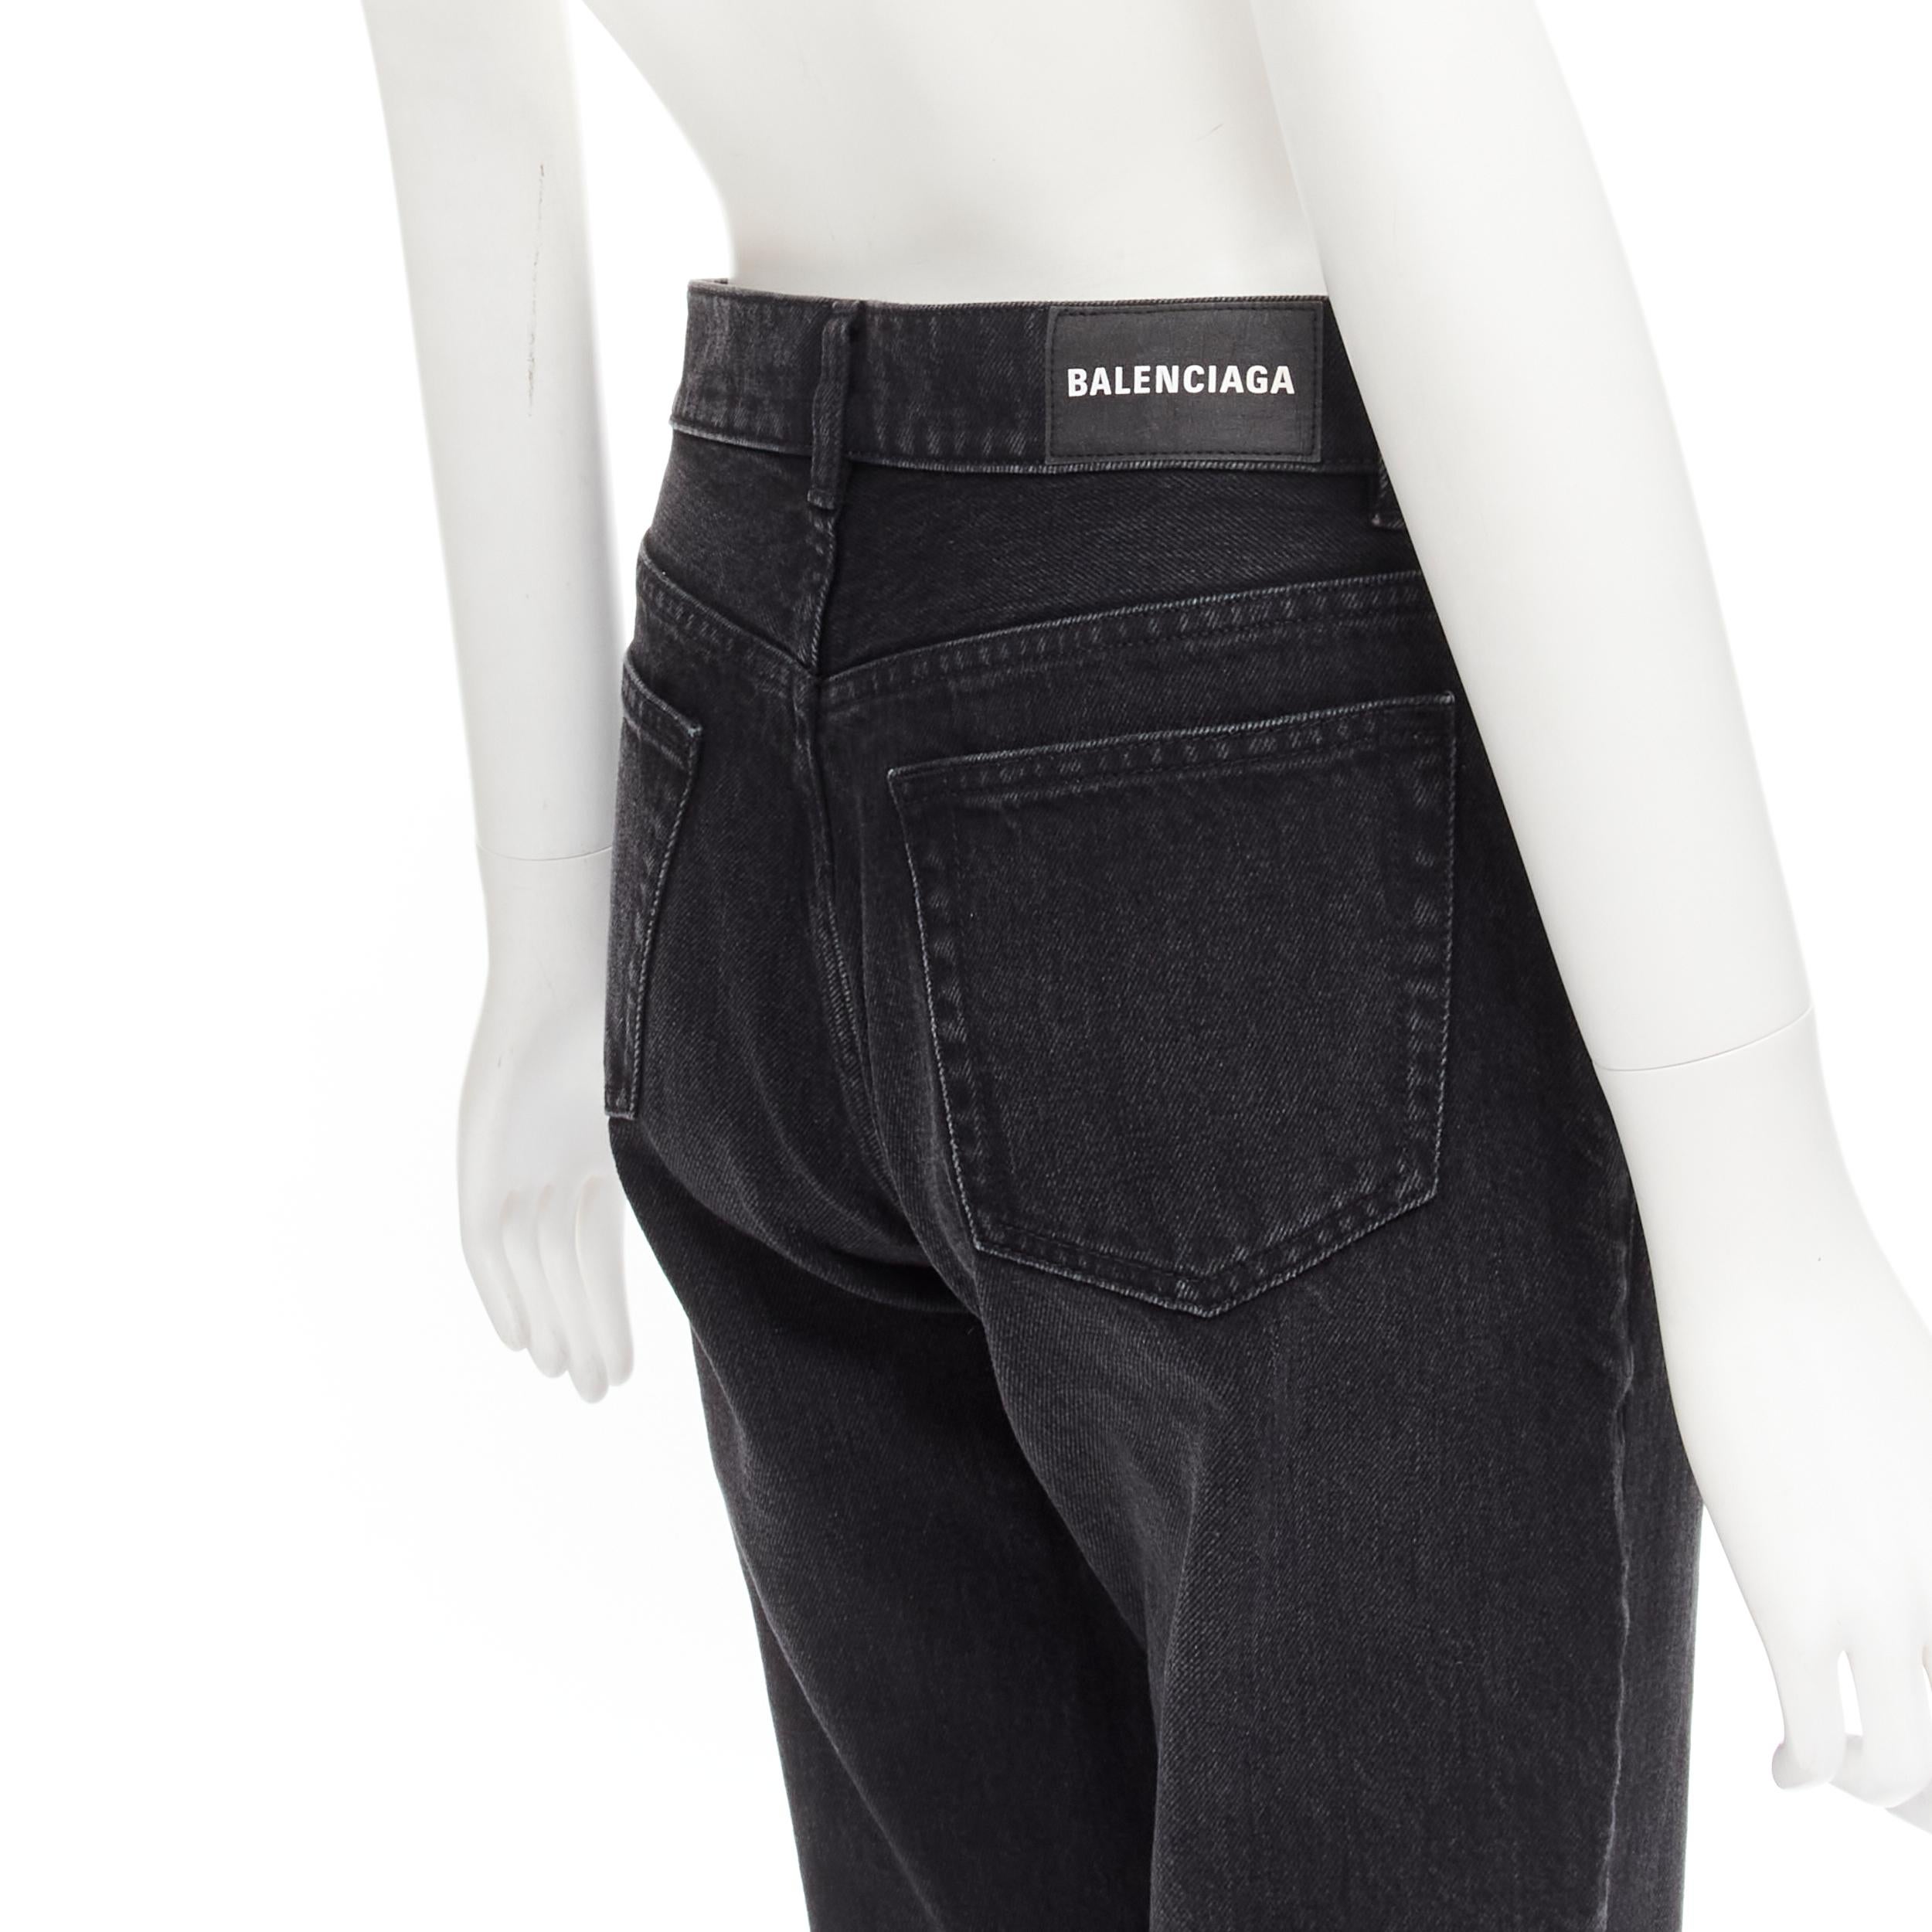 Women's BALENCIAGA black washed denim exposed buttons 5-pocket high waisted jeans 28